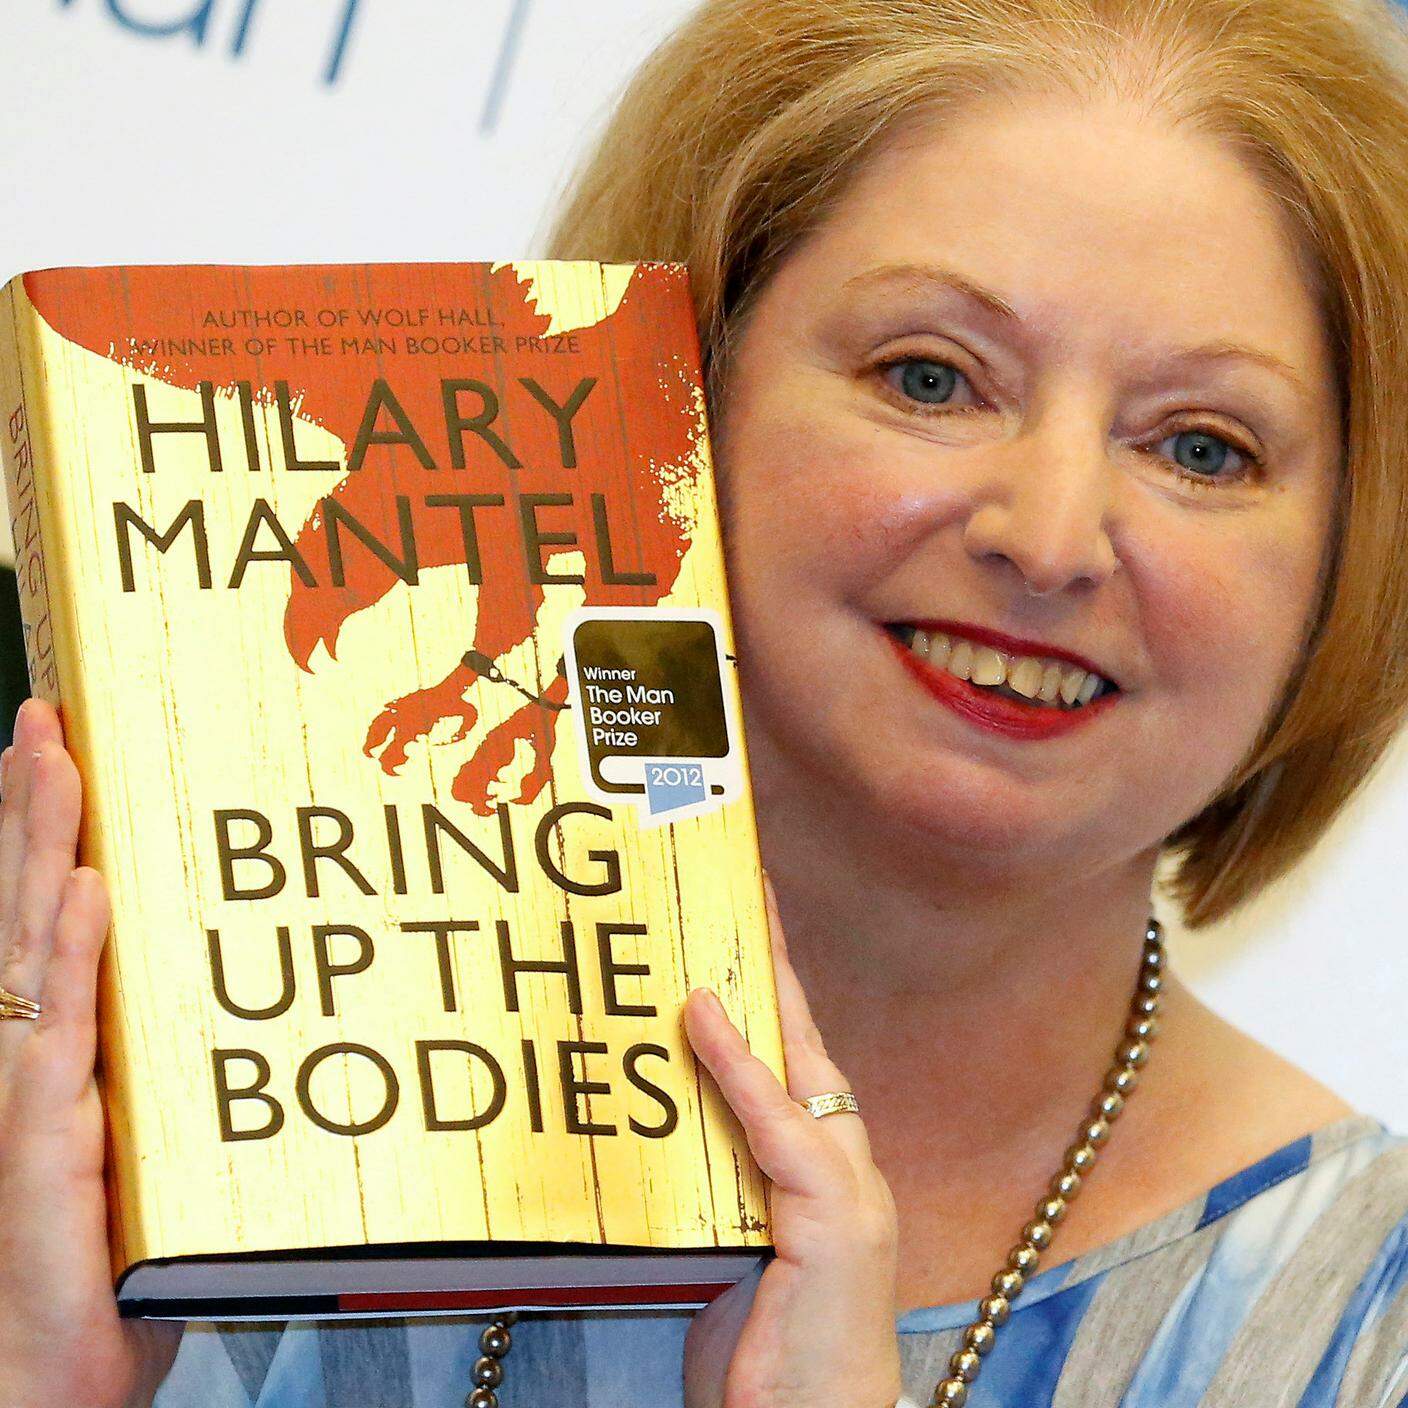 Hilary Mantel col suo romanzo "Bring Up the Bodies"